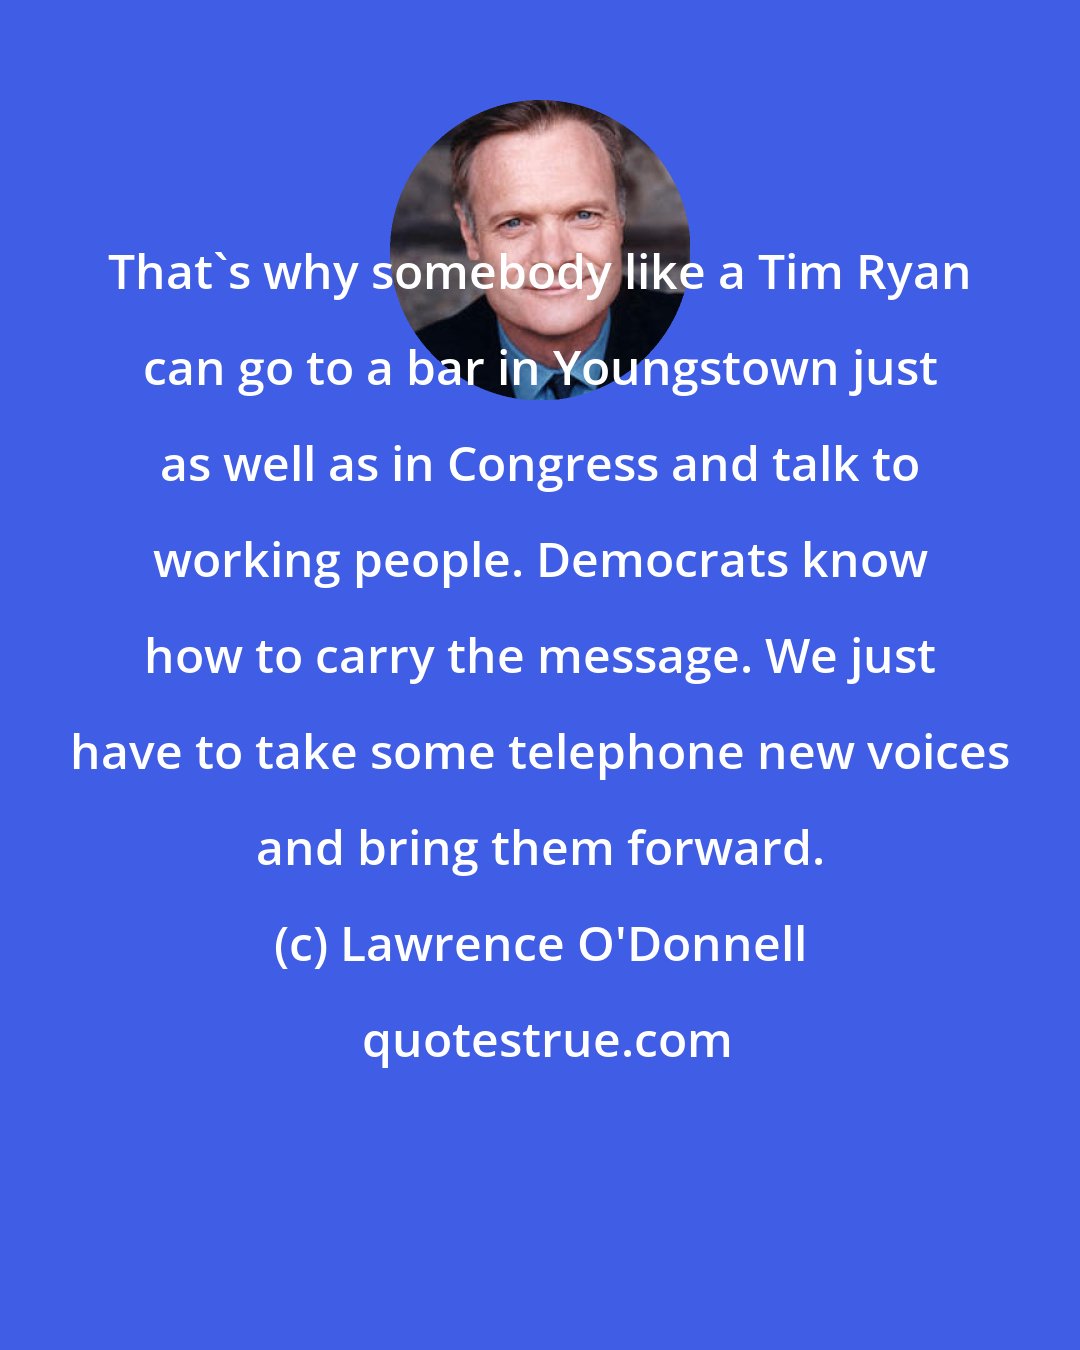 Lawrence O'Donnell: That`s why somebody like a Tim Ryan can go to a bar in Youngstown just as well as in Congress and talk to working people. Democrats know how to carry the message. We just have to take some telephone new voices and bring them forward.